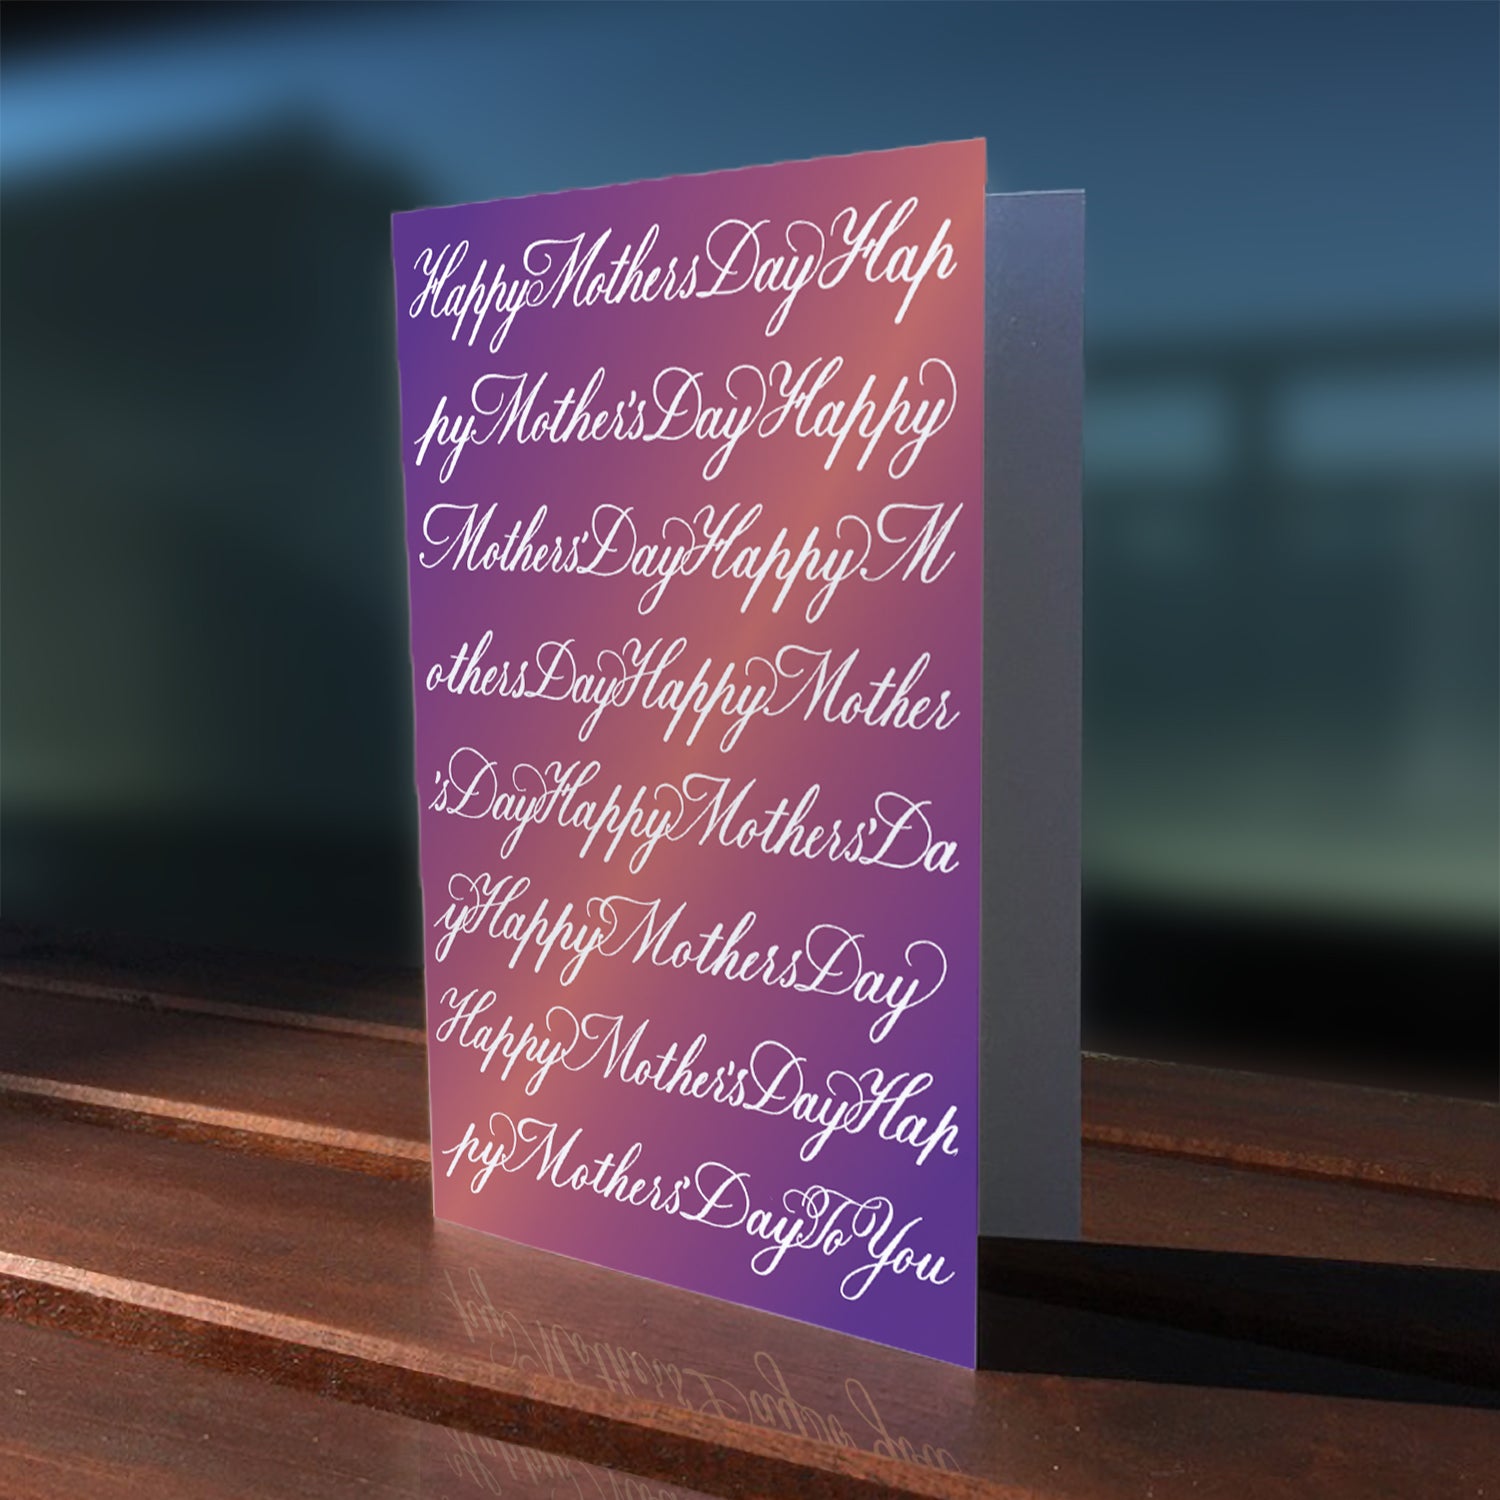 A lifestyle view of the greeting card: "Happy Mothers Day to You"